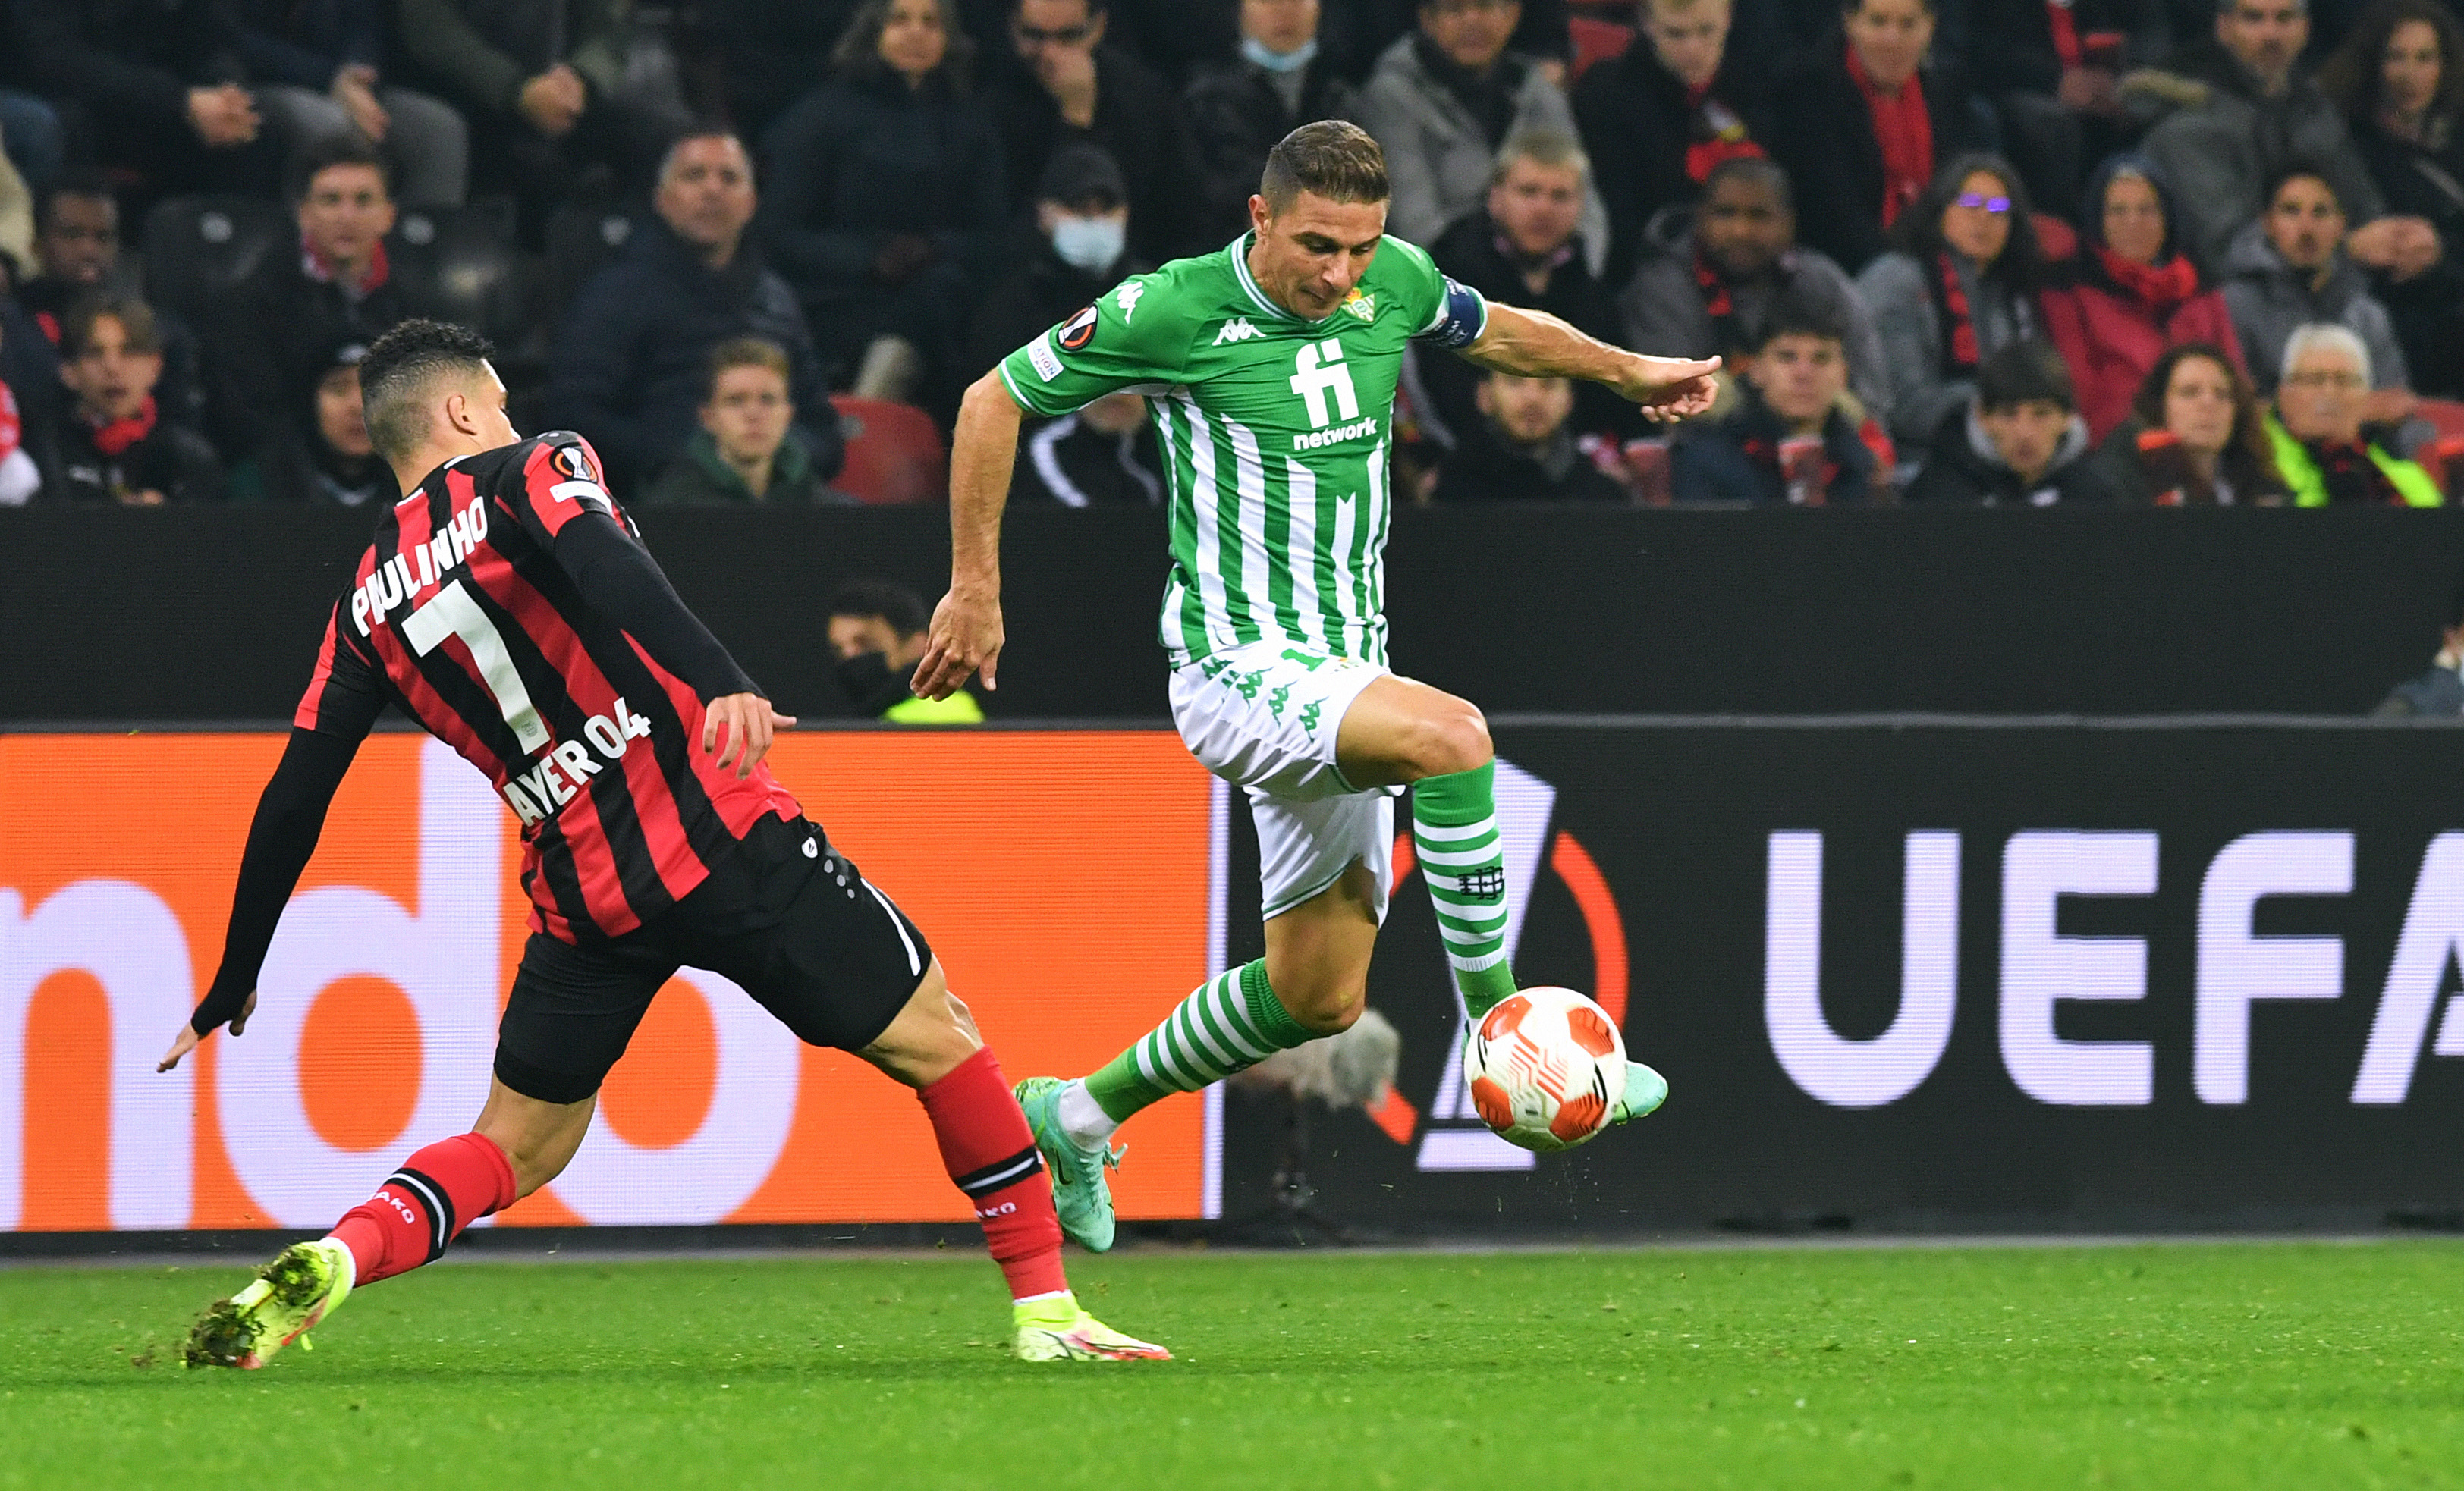 Real Betis suffer 4-0 humbling at the hands of Bayer Leverkusen in the Europa League - Football Espana